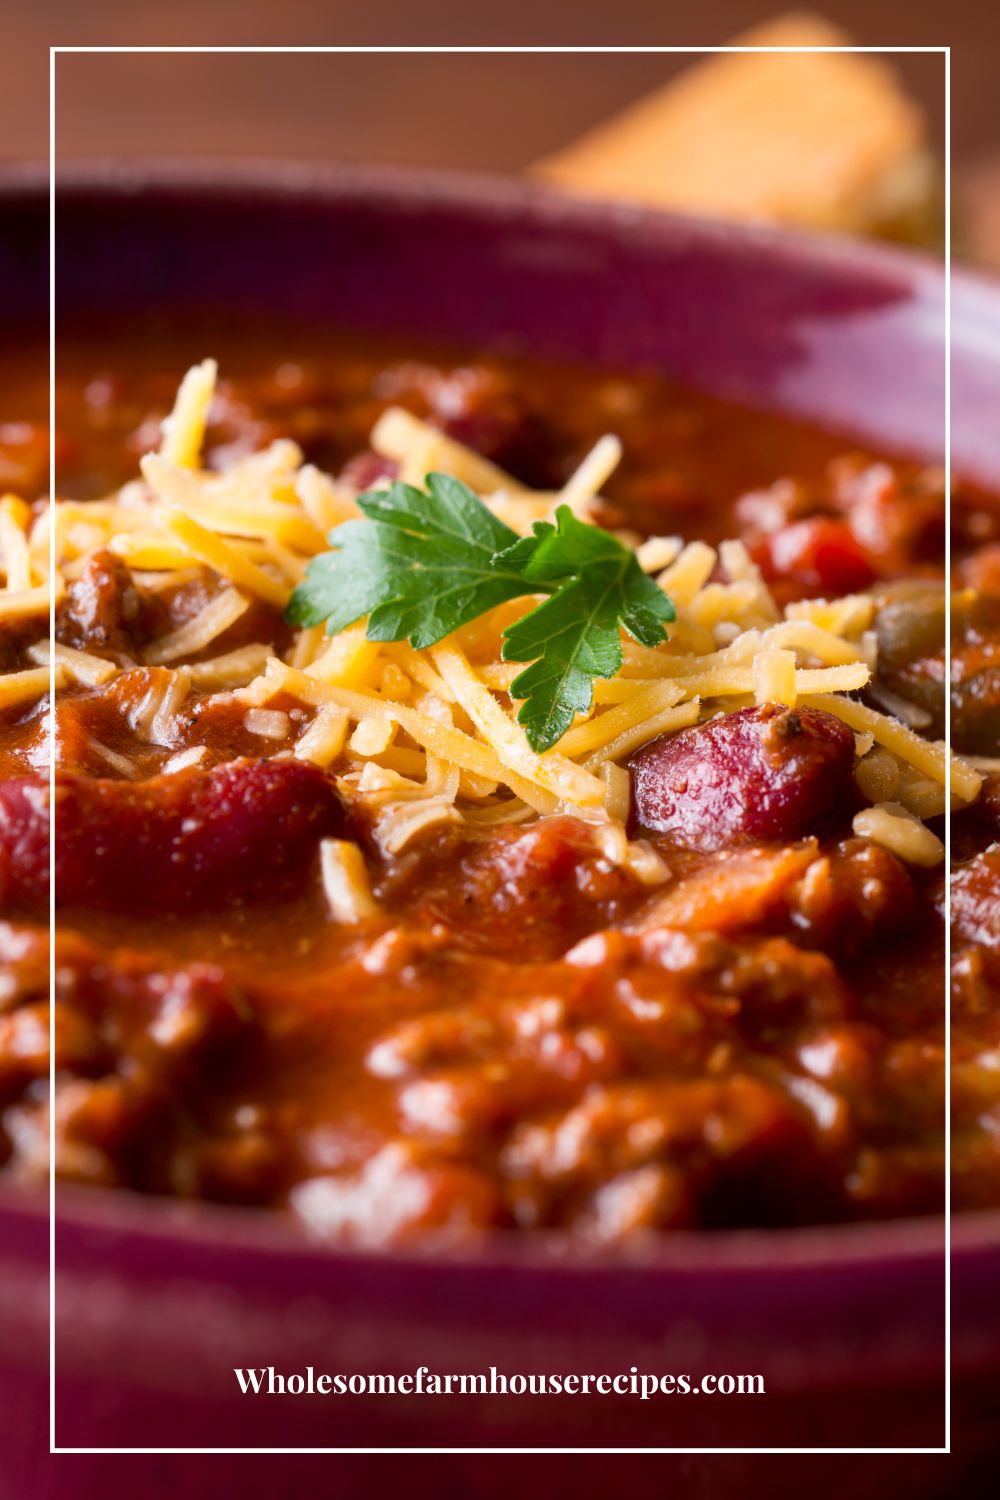 Chili Recipe with Bush's Baked Beans